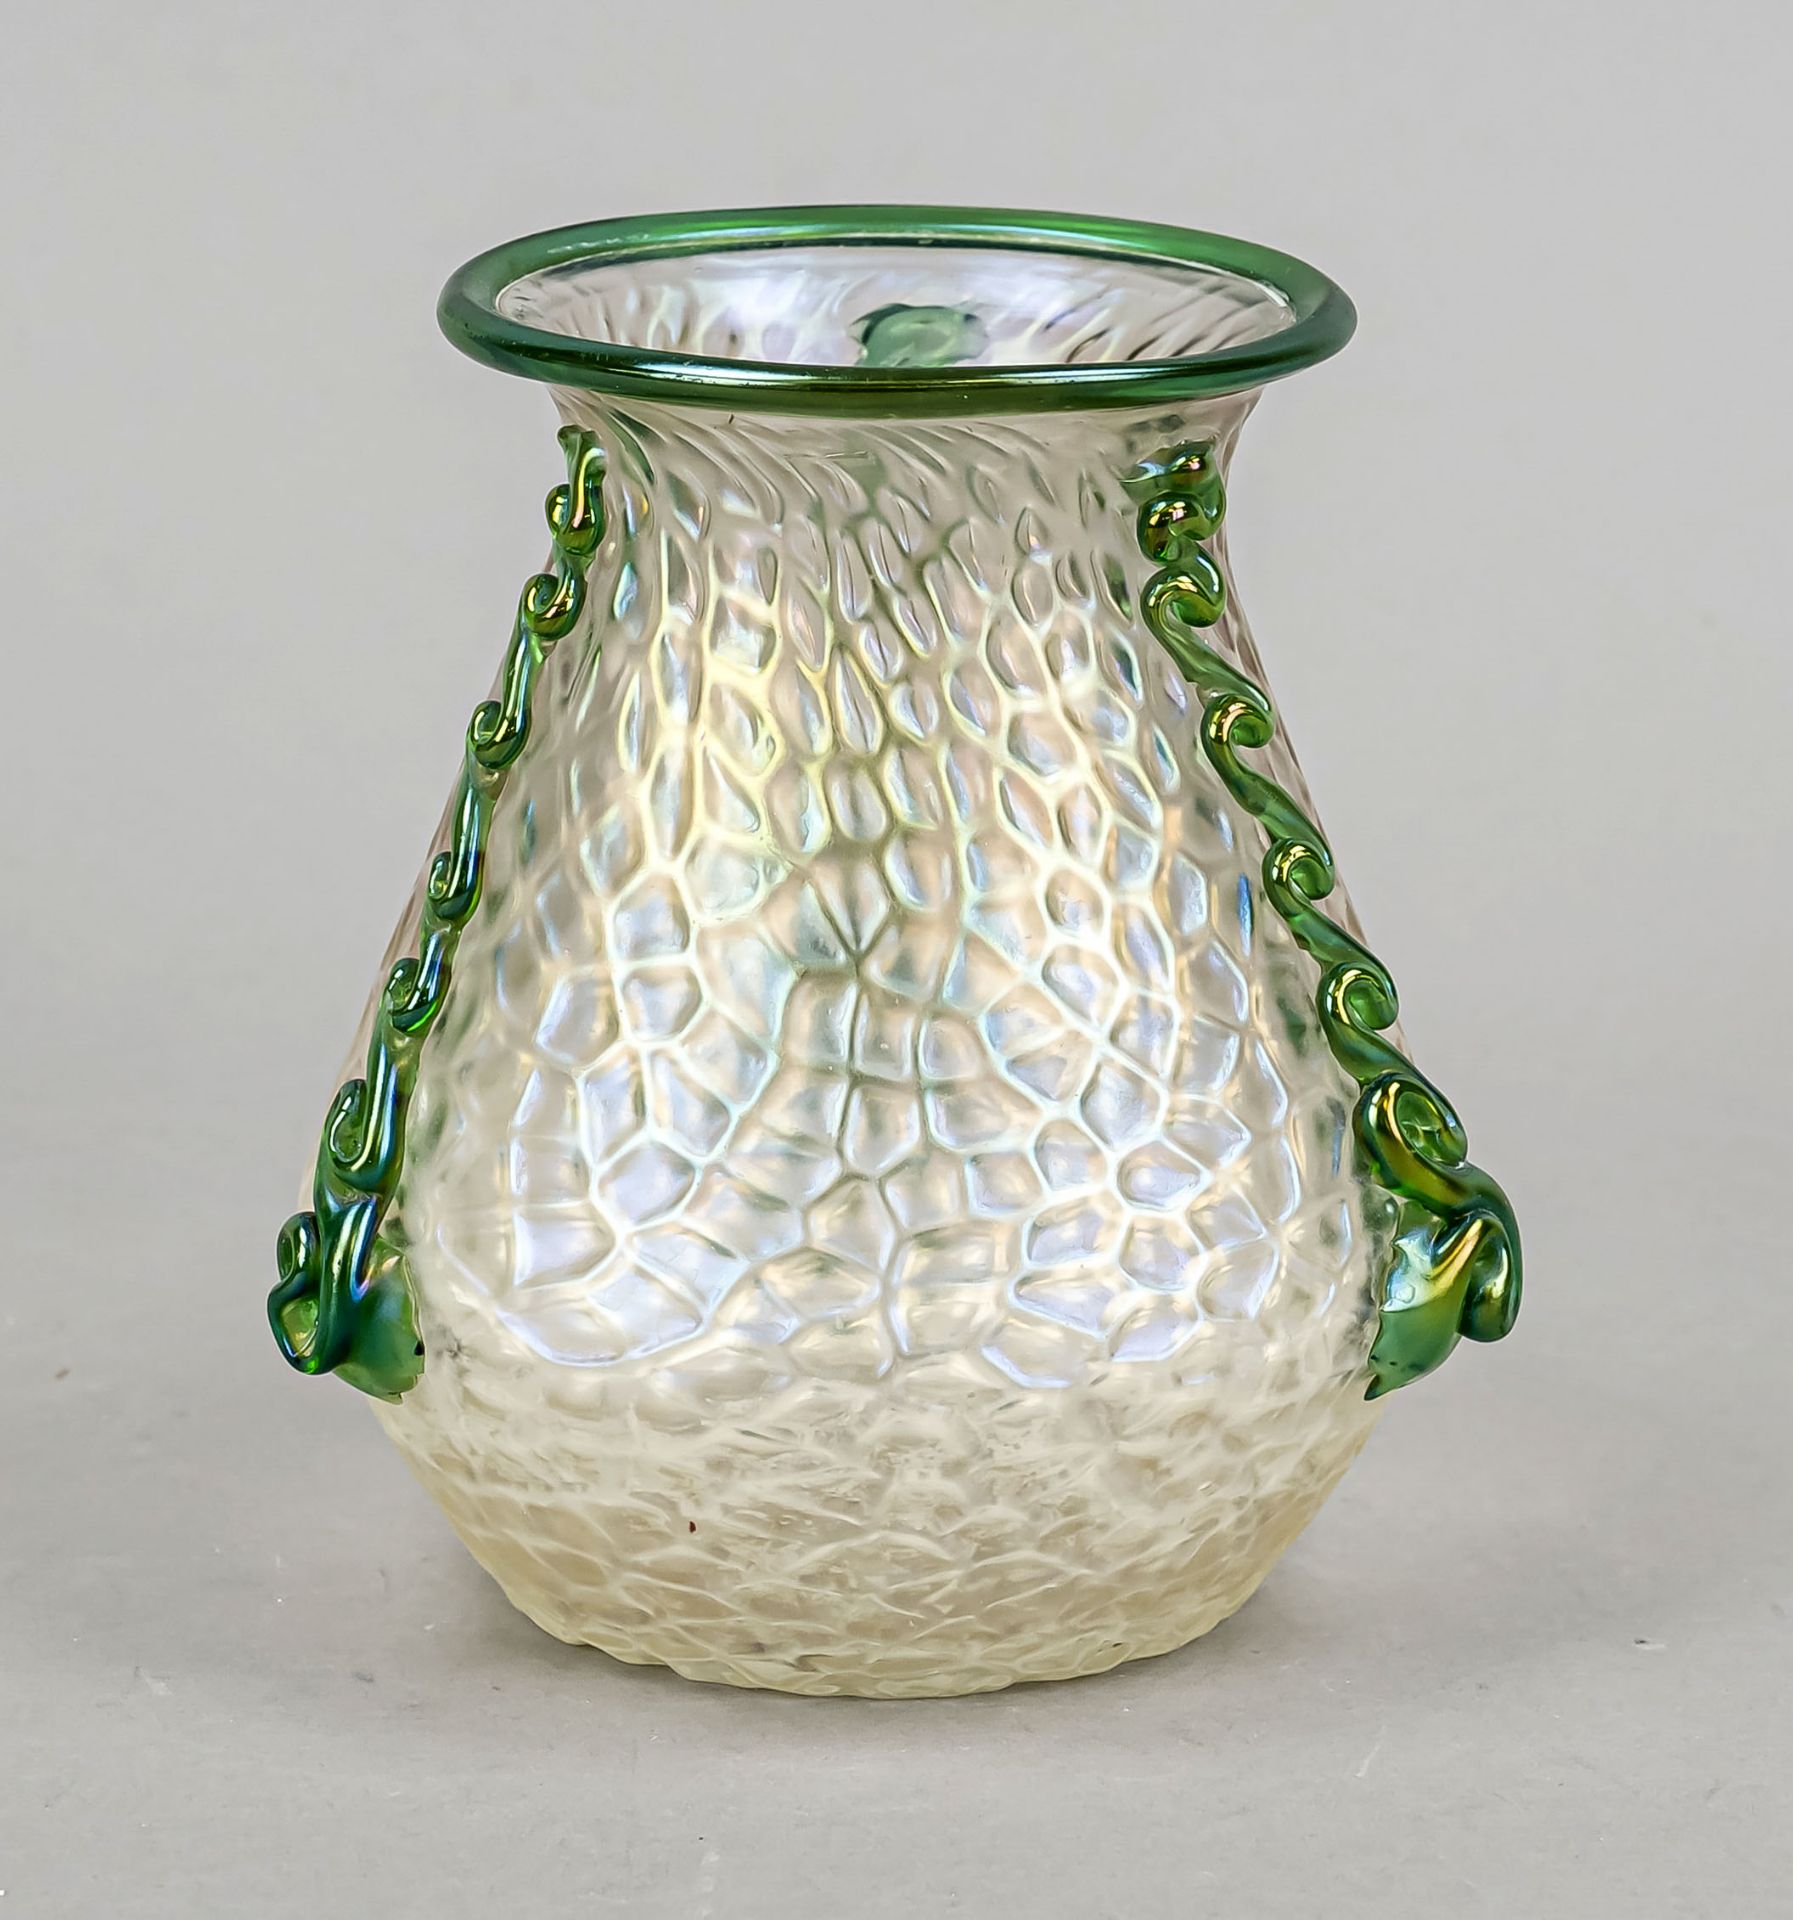 Vase, probably Bohemia, 20th century, Loetz (?), round base, curved body with flared rim, clear